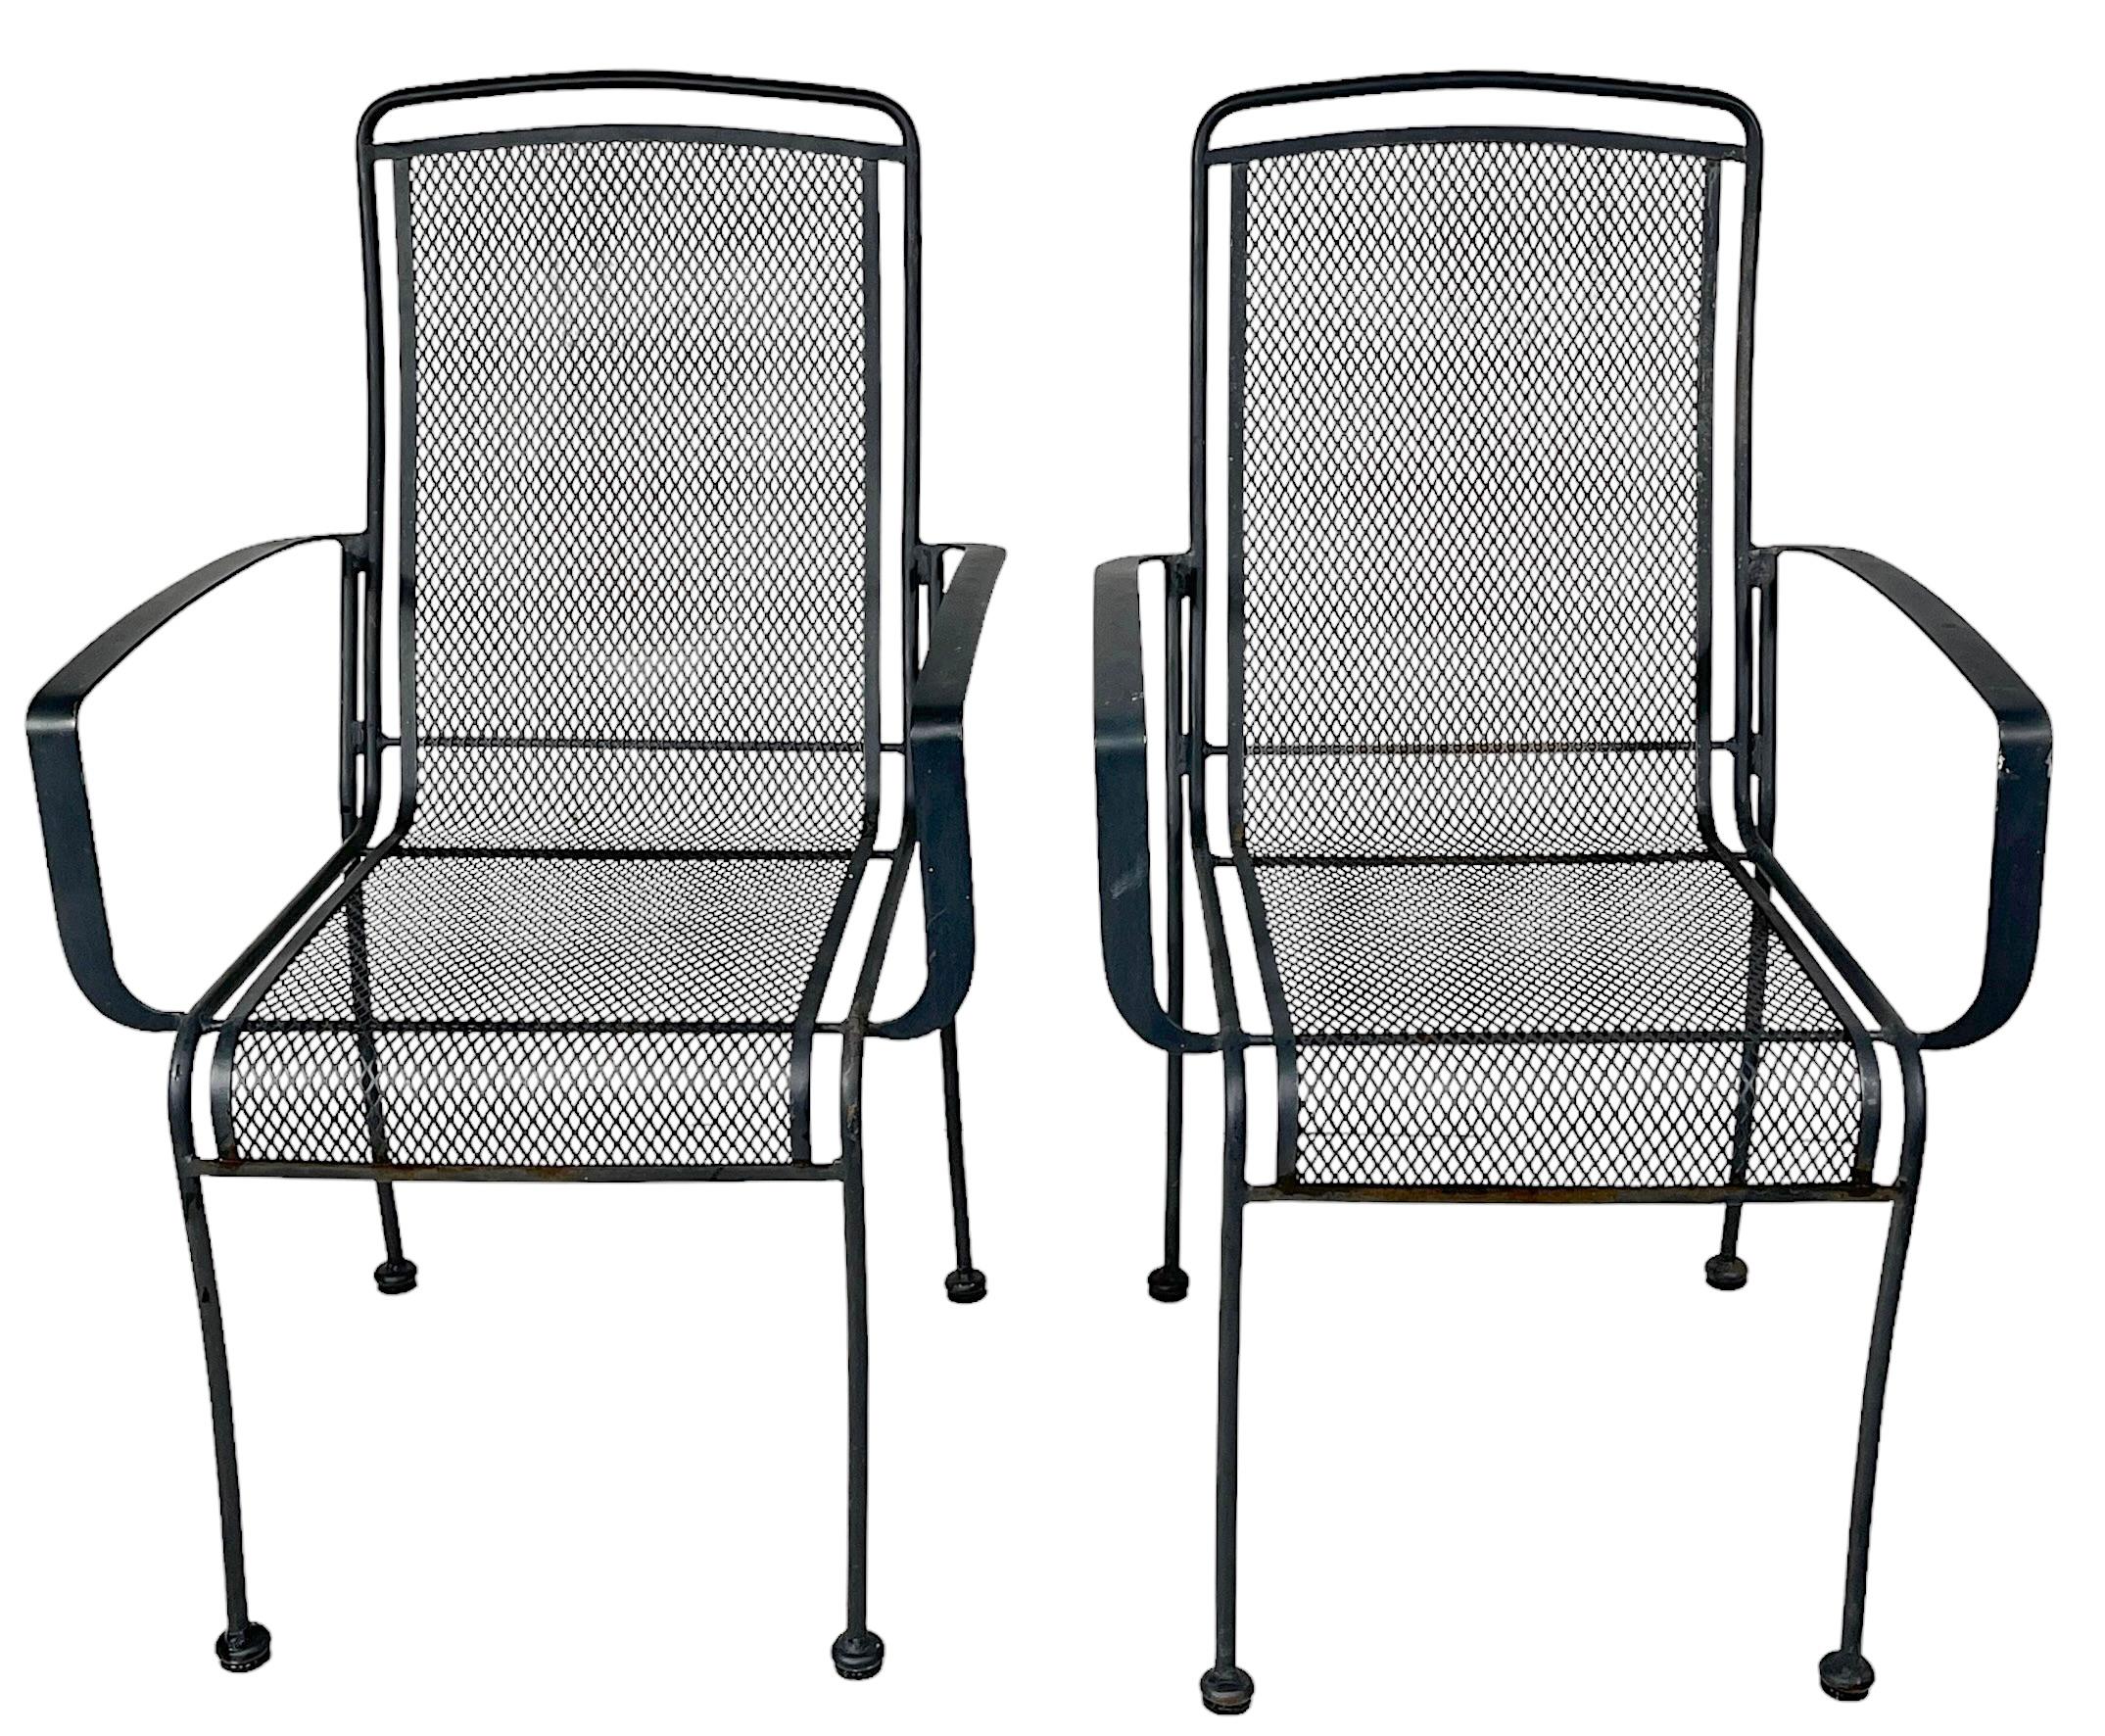 Pr. Mid Century Wrought Iron Garden Patio Poolside chairs att. to Woodard  In Good Condition For Sale In New York, NY